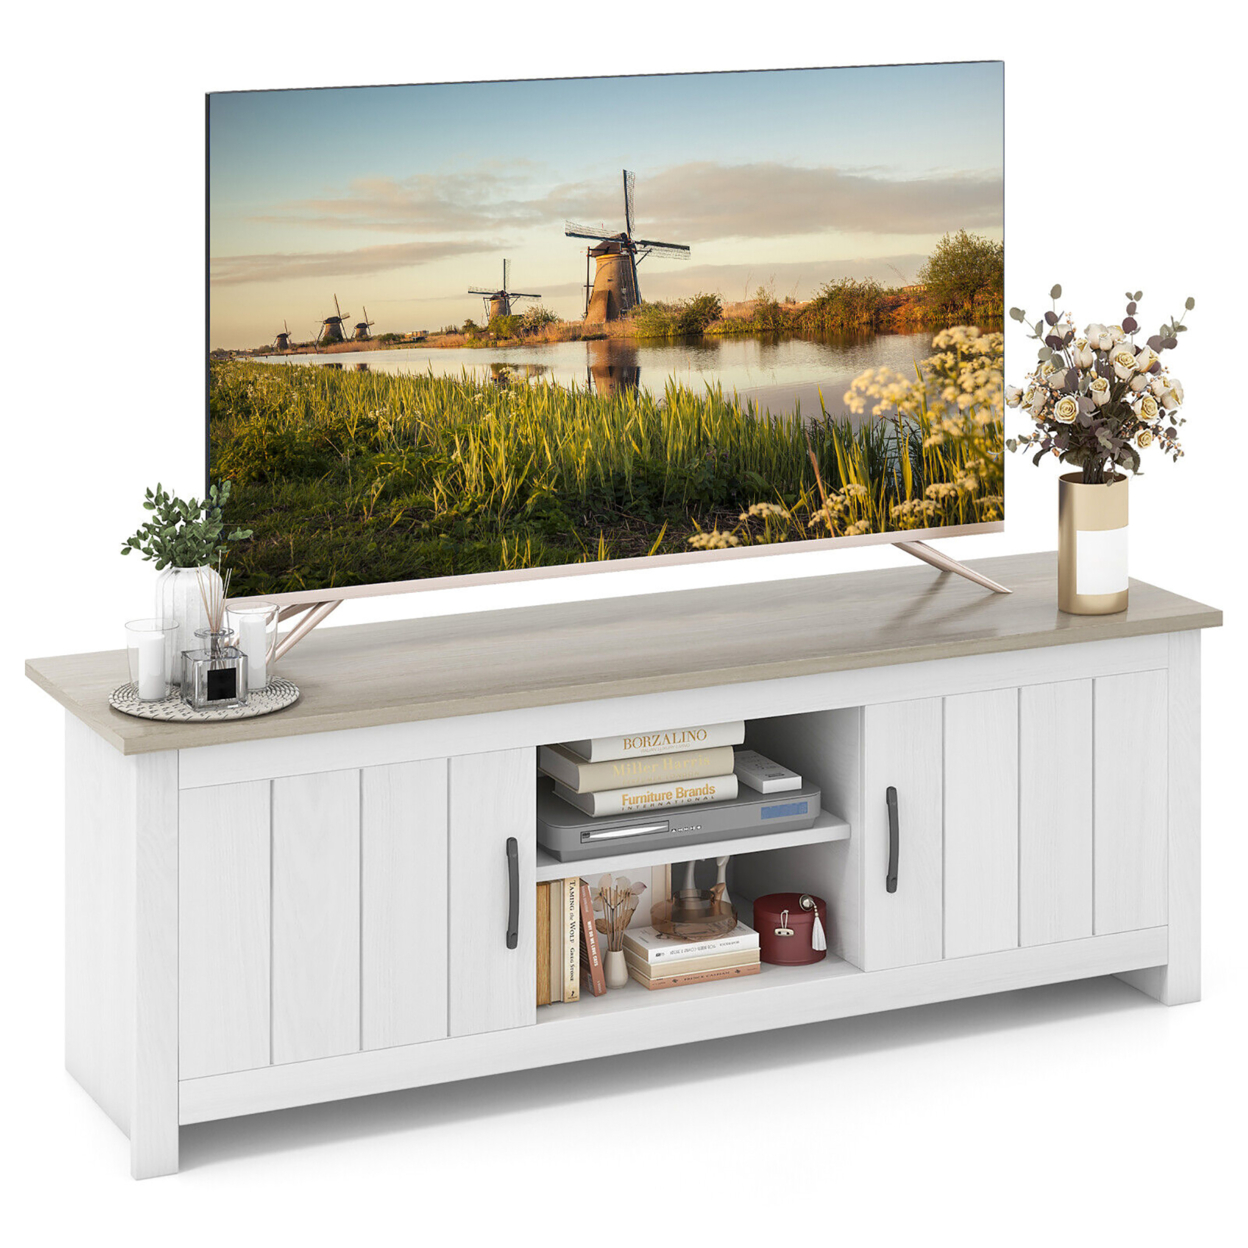 Farmhouse TV Stand For TVs Up To 65'' Media Console Center W/ Doors Cubbies - White Oak